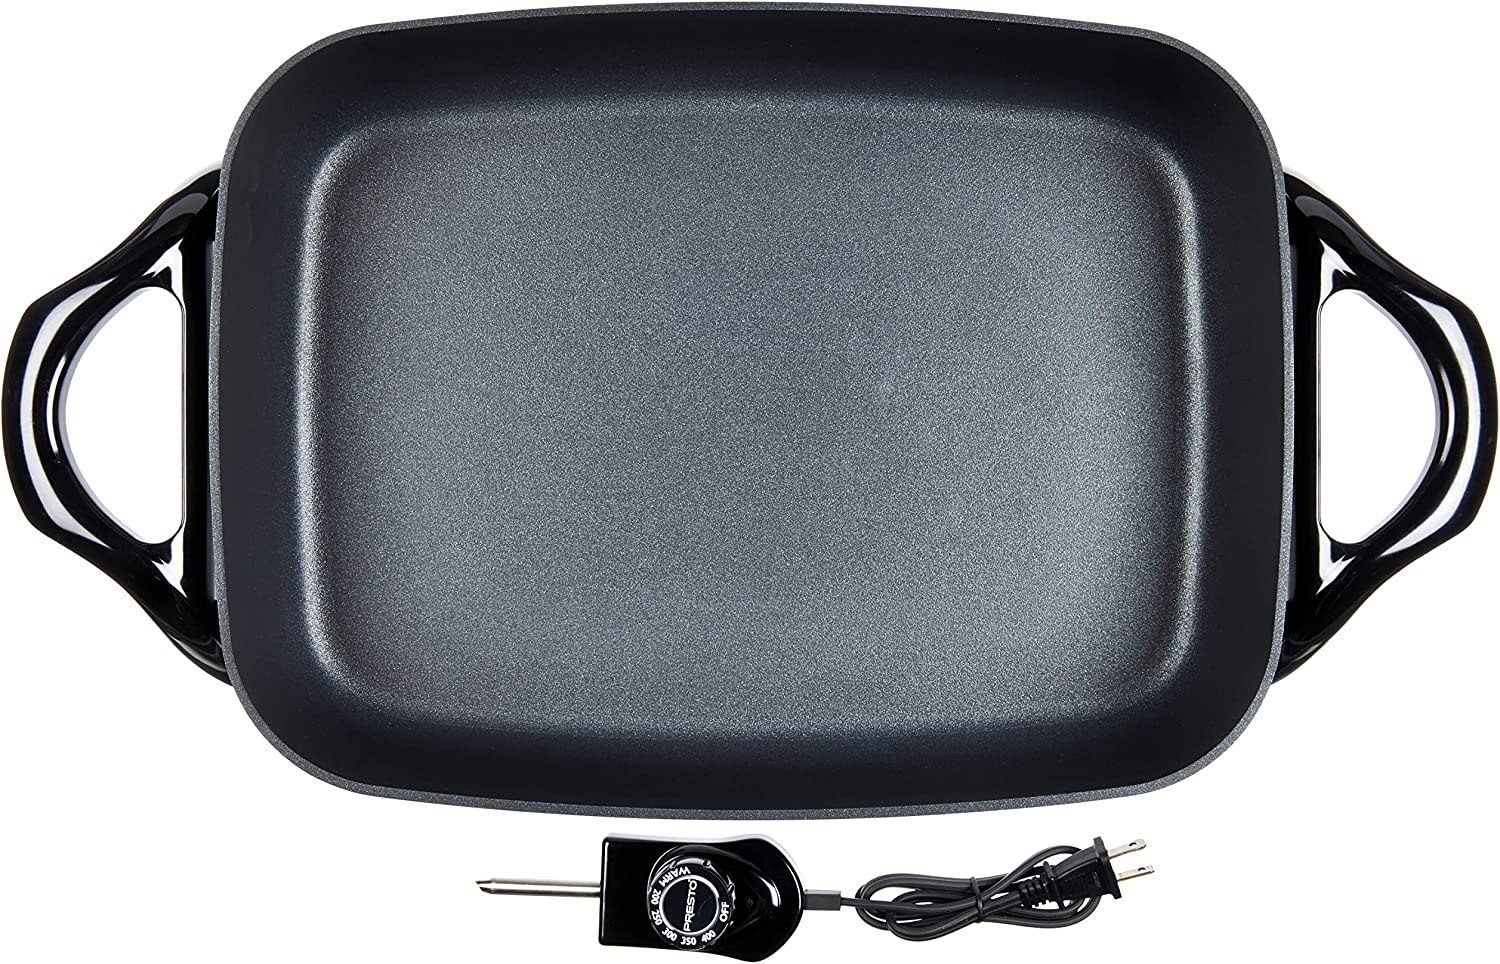 https://bigbigmart.com/wp-content/uploads/2023/07/Presto-06852-16-Inch-Electric-Skillet-with-Glass-Cover3.jpg